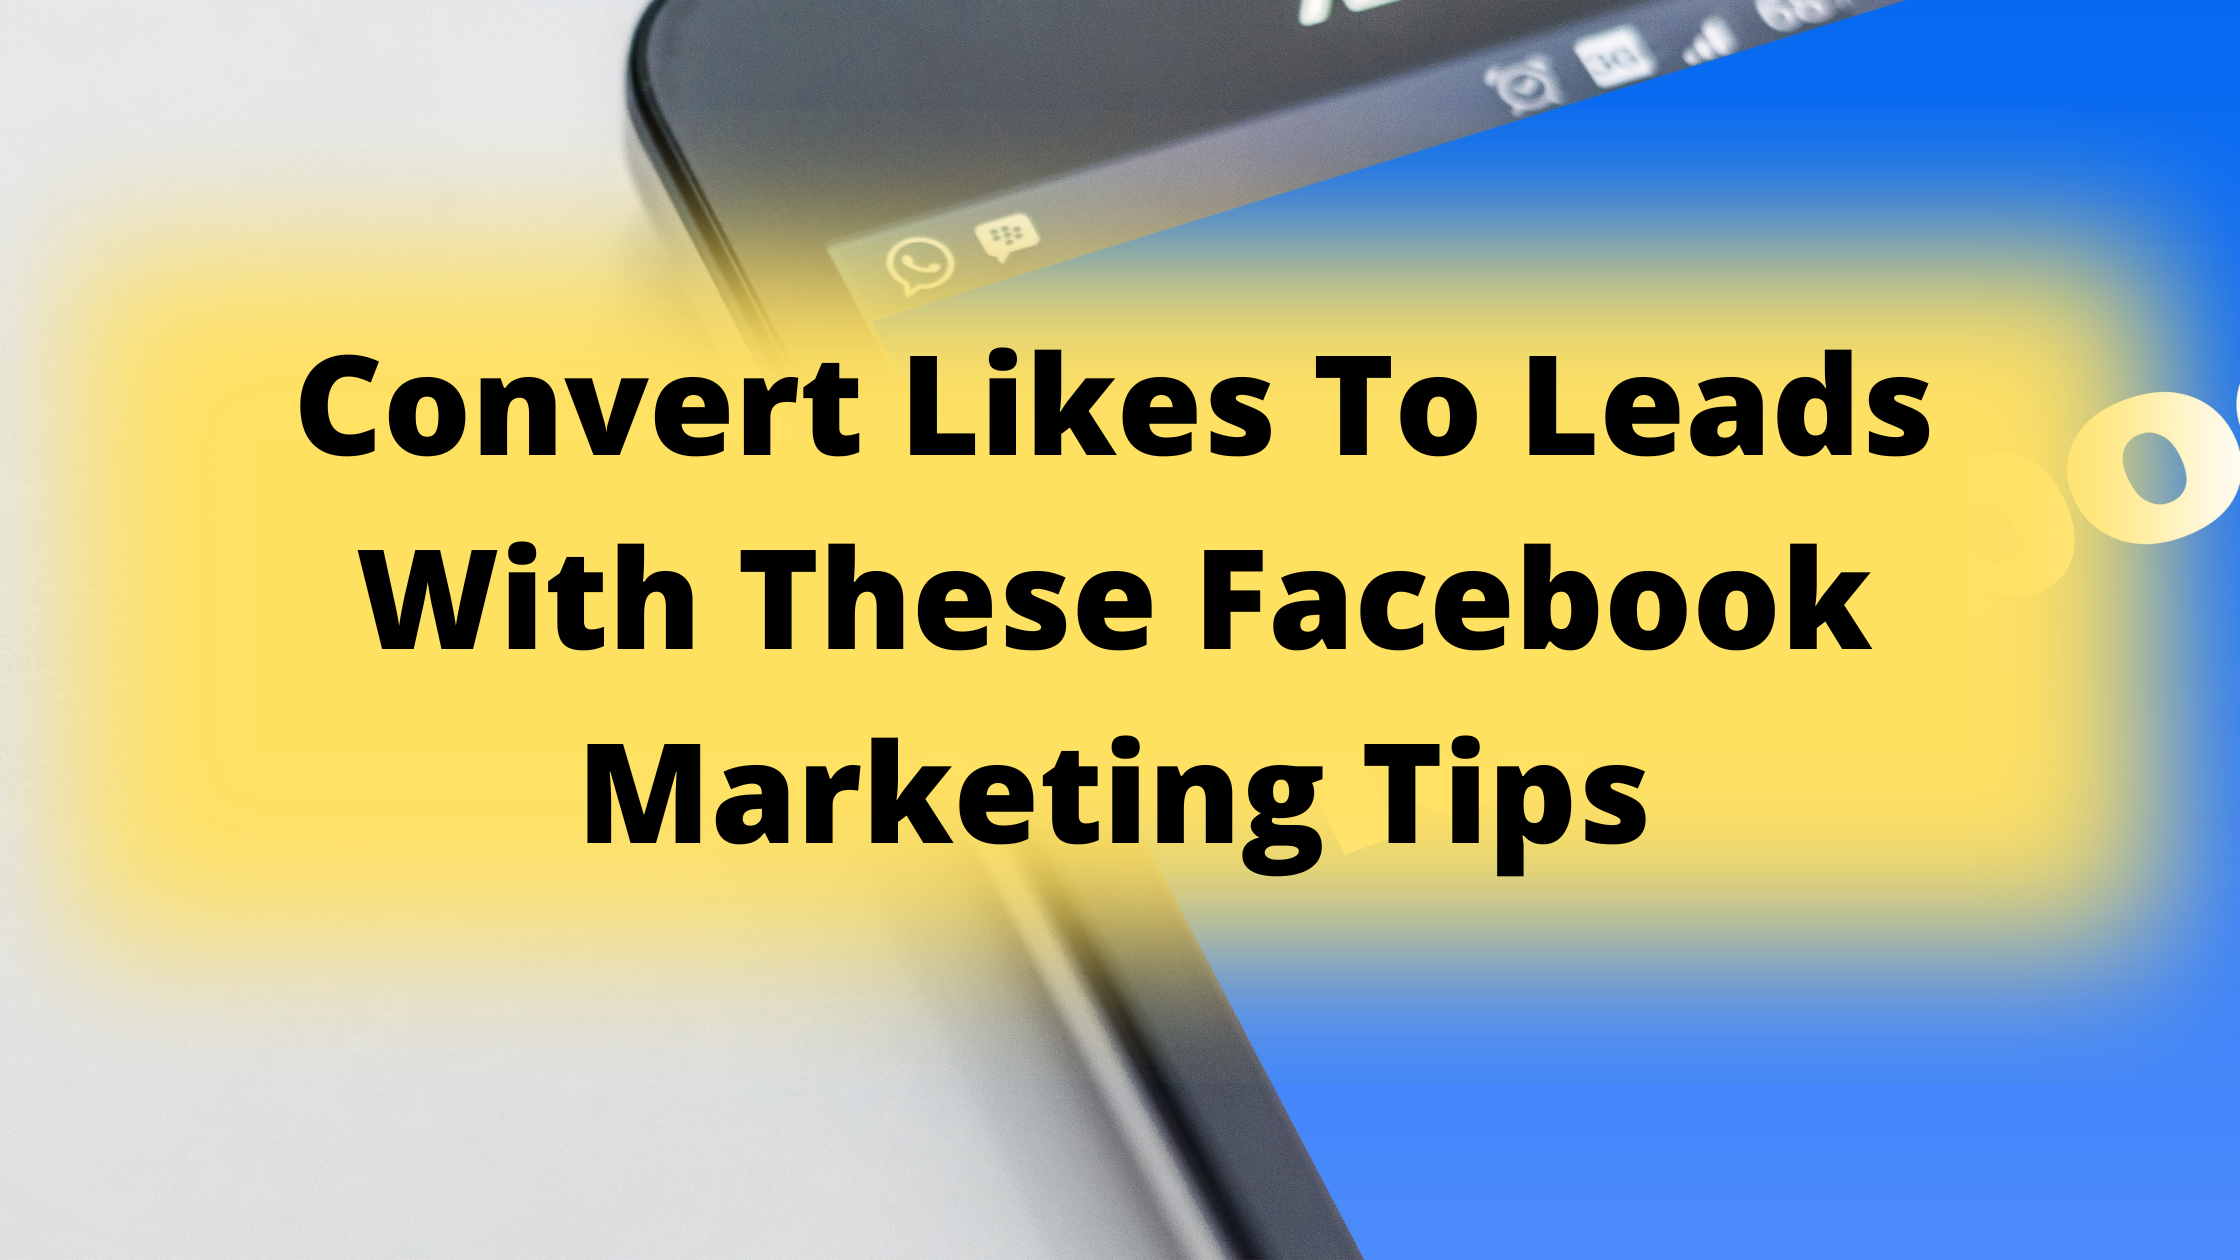 Convert Likes To Leads With These Facebook Marketing Tips